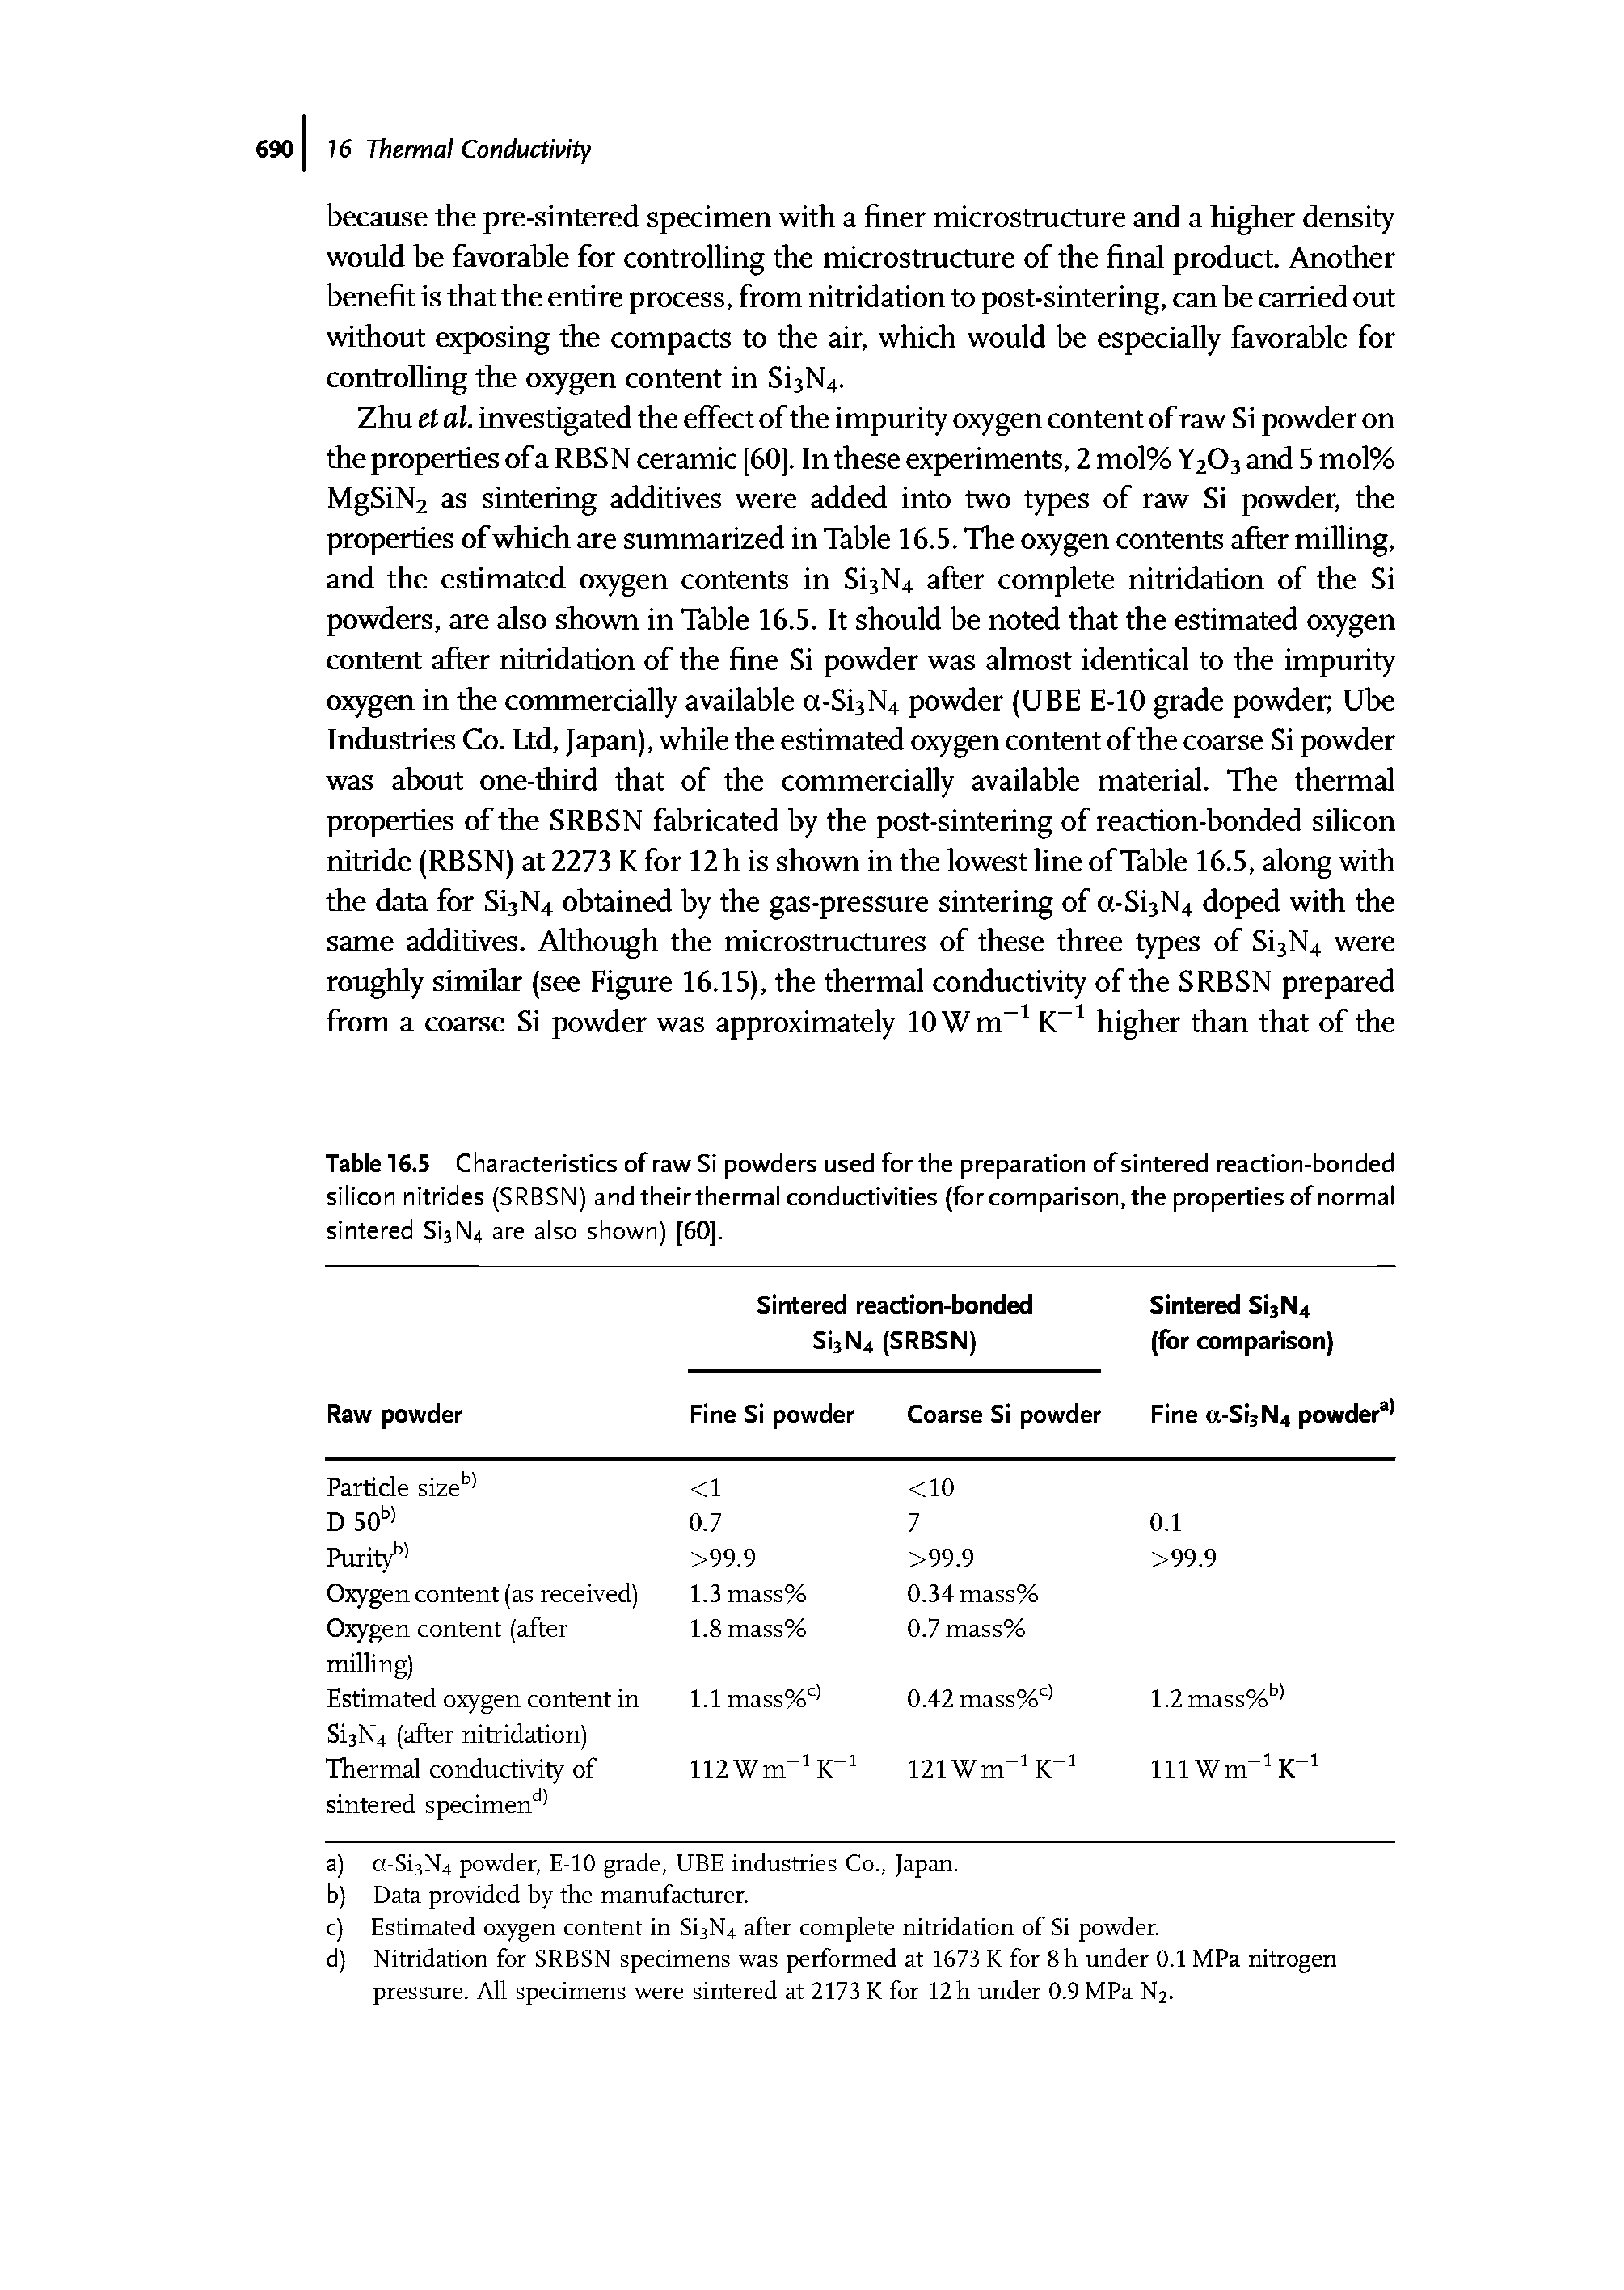 Table 16.5 Characteristics of raw Si powders used for the preparation of sintered reaction-bonded silicon nitrides (SRBSN) and theirthermal conductivities (for comparison, the properties of normal sintered Si3N4 are also shown) [60].